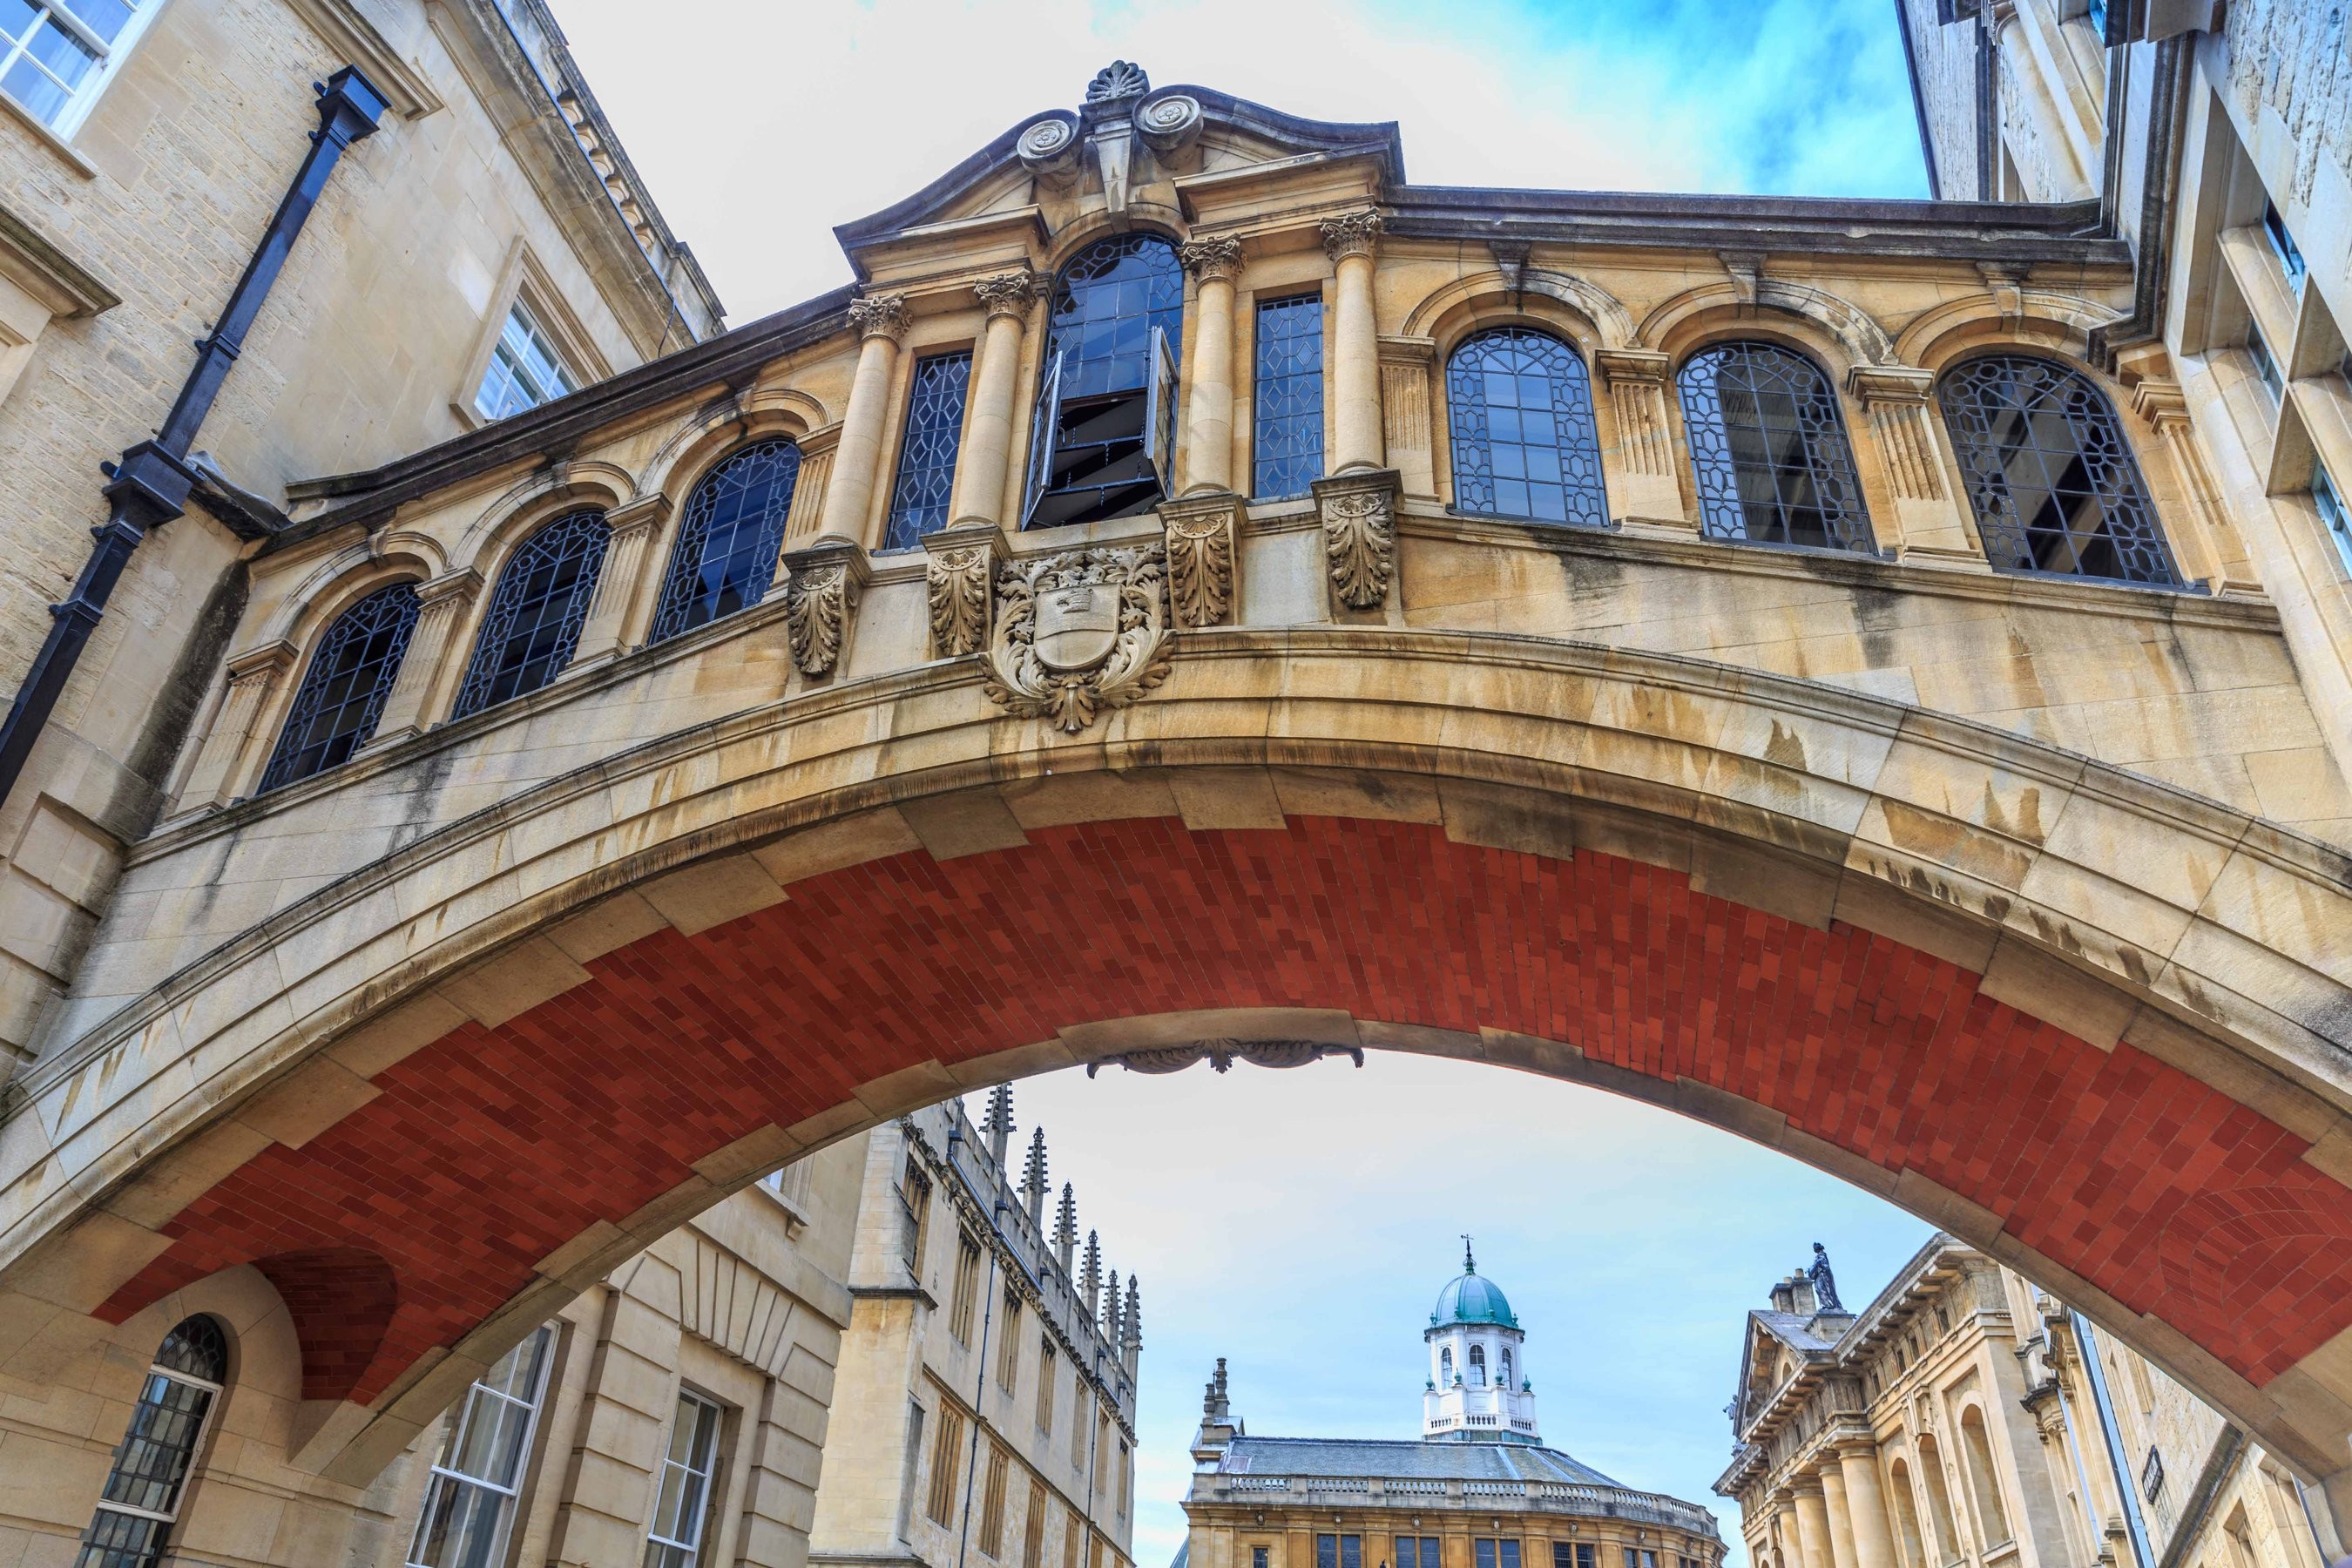 An arched walkway with windows connecting two buildings on the Oxford University campus